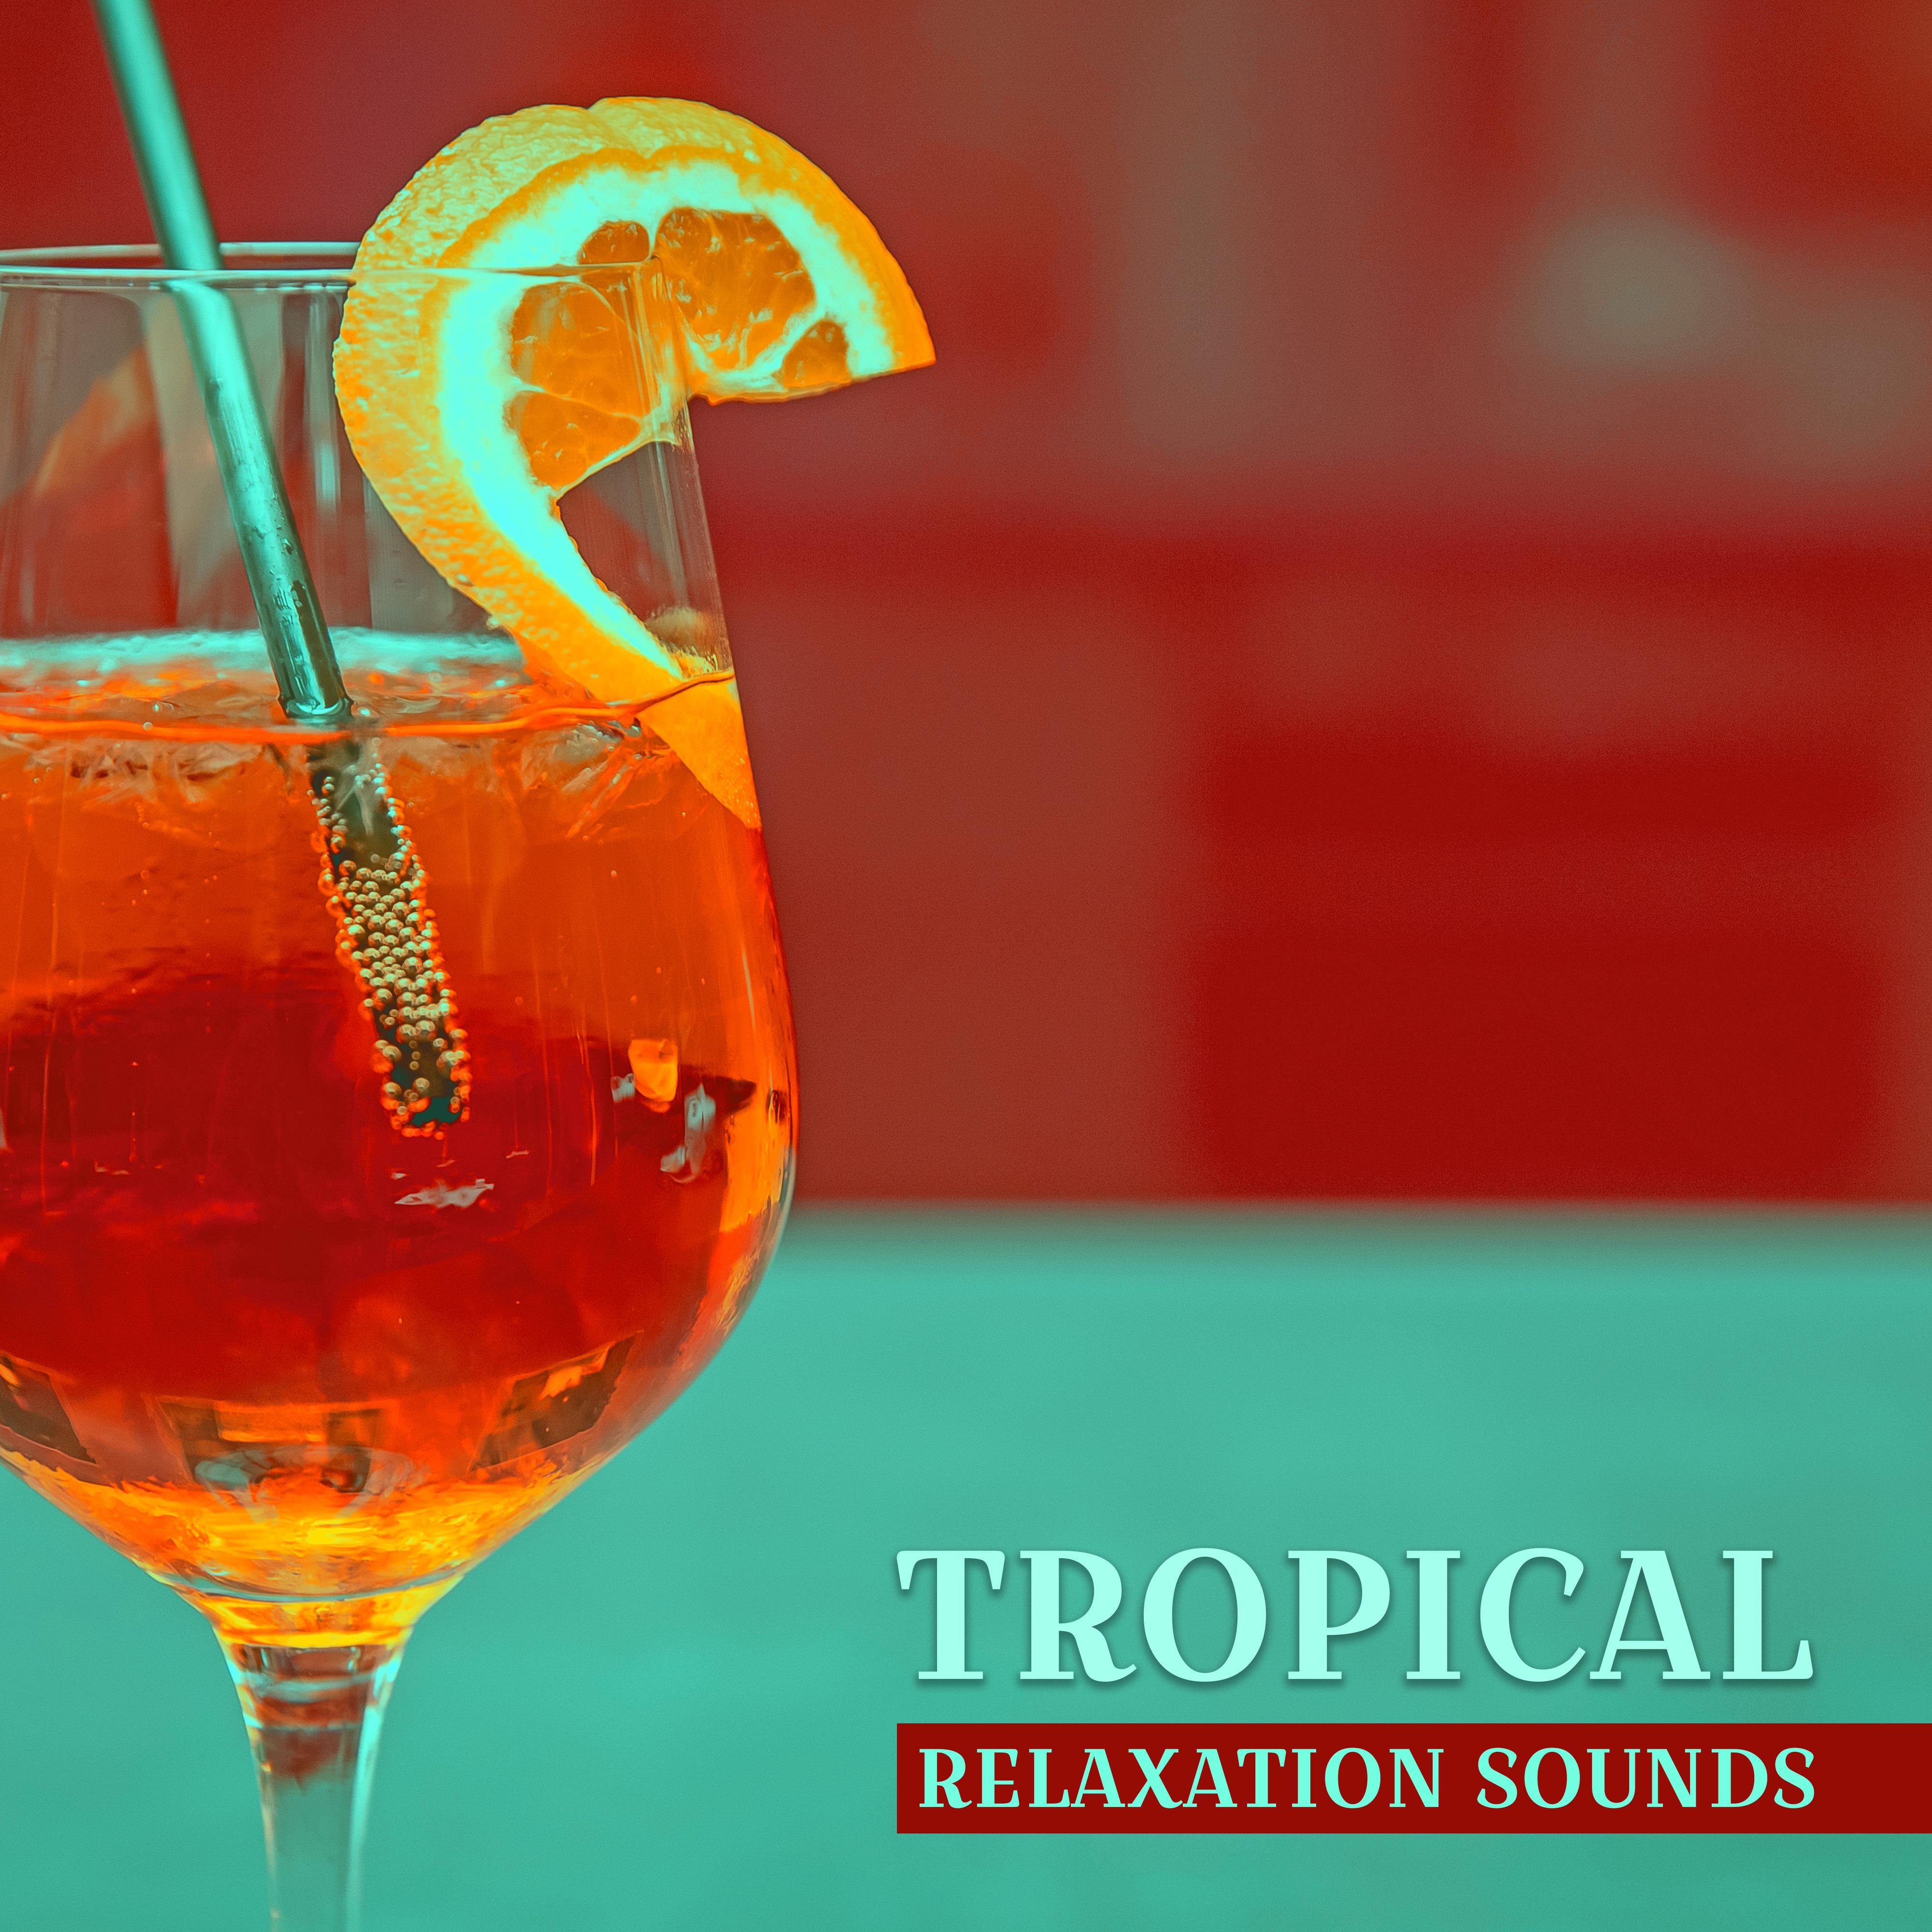 Tropical Relaxation Sounds – Calming Chill Out Waves, Stress Free, Holiday Music, Beach Lounge